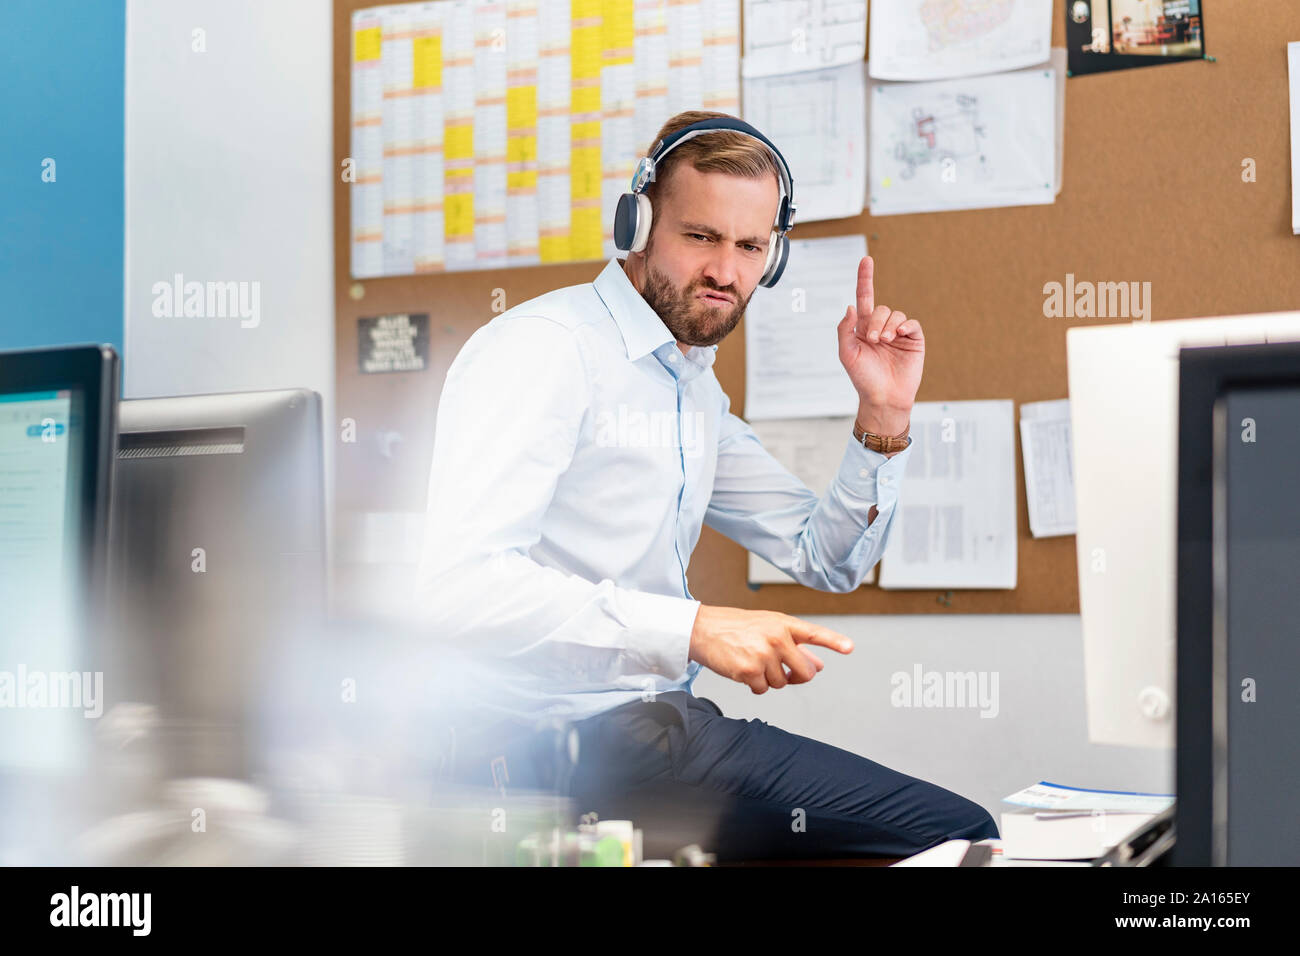 Businessman listening to music with headphones in office Stock Photo